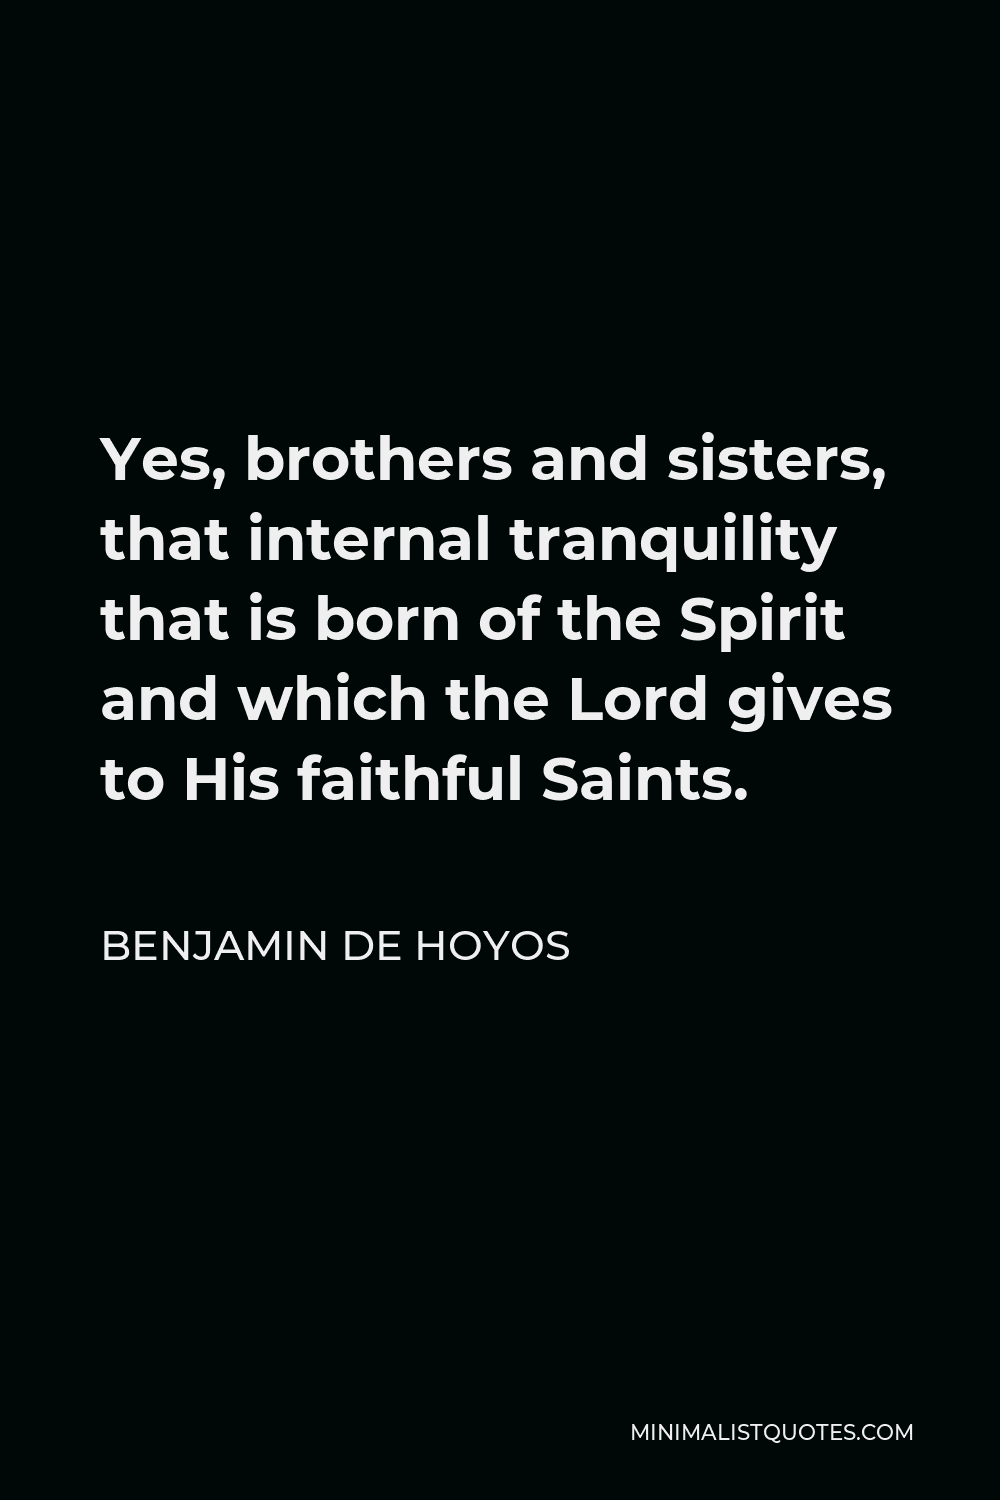 Benjamin De Hoyos Quote - Yes, brothers and sisters, that internal tranquility that is born of the Spirit and which the Lord gives to His faithful Saints.